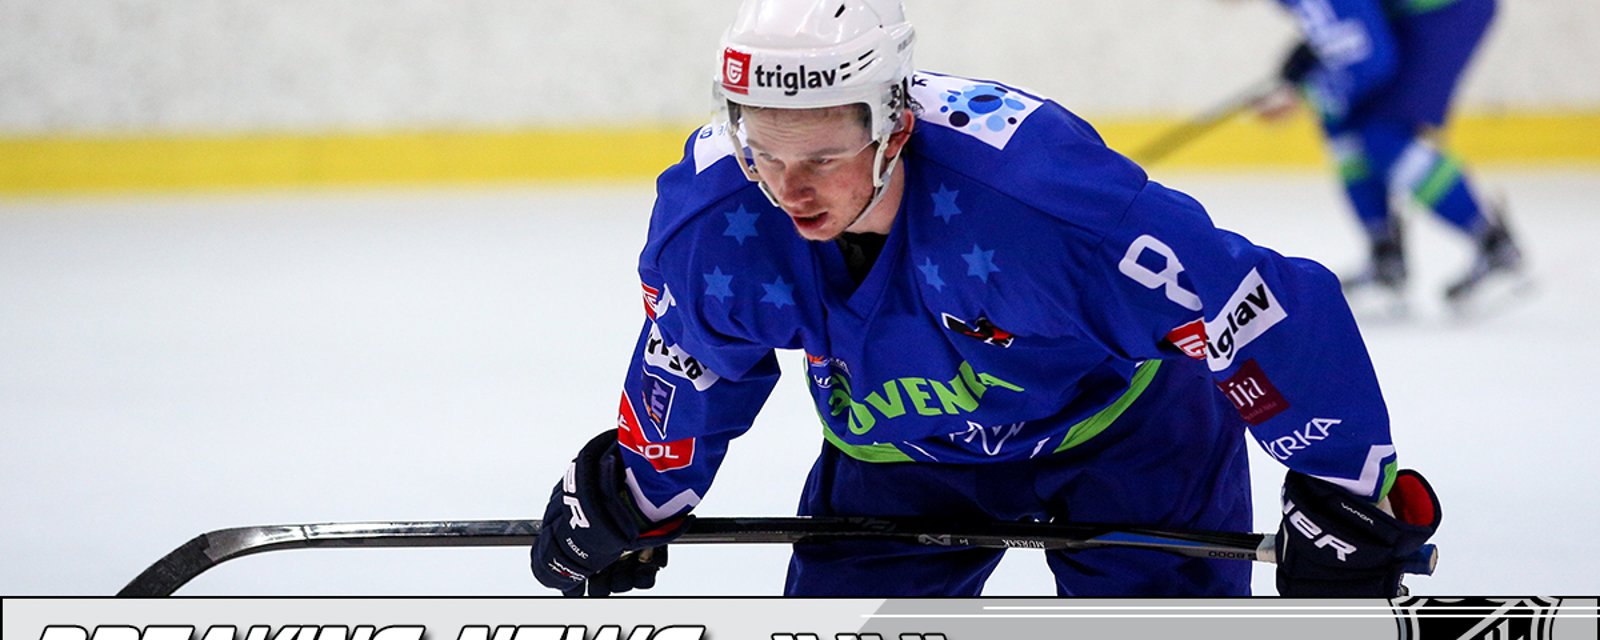 GOTTA SEE IT: Slovenian player suspended 2 game for RIDICULOUSLY DANGEROUS act 